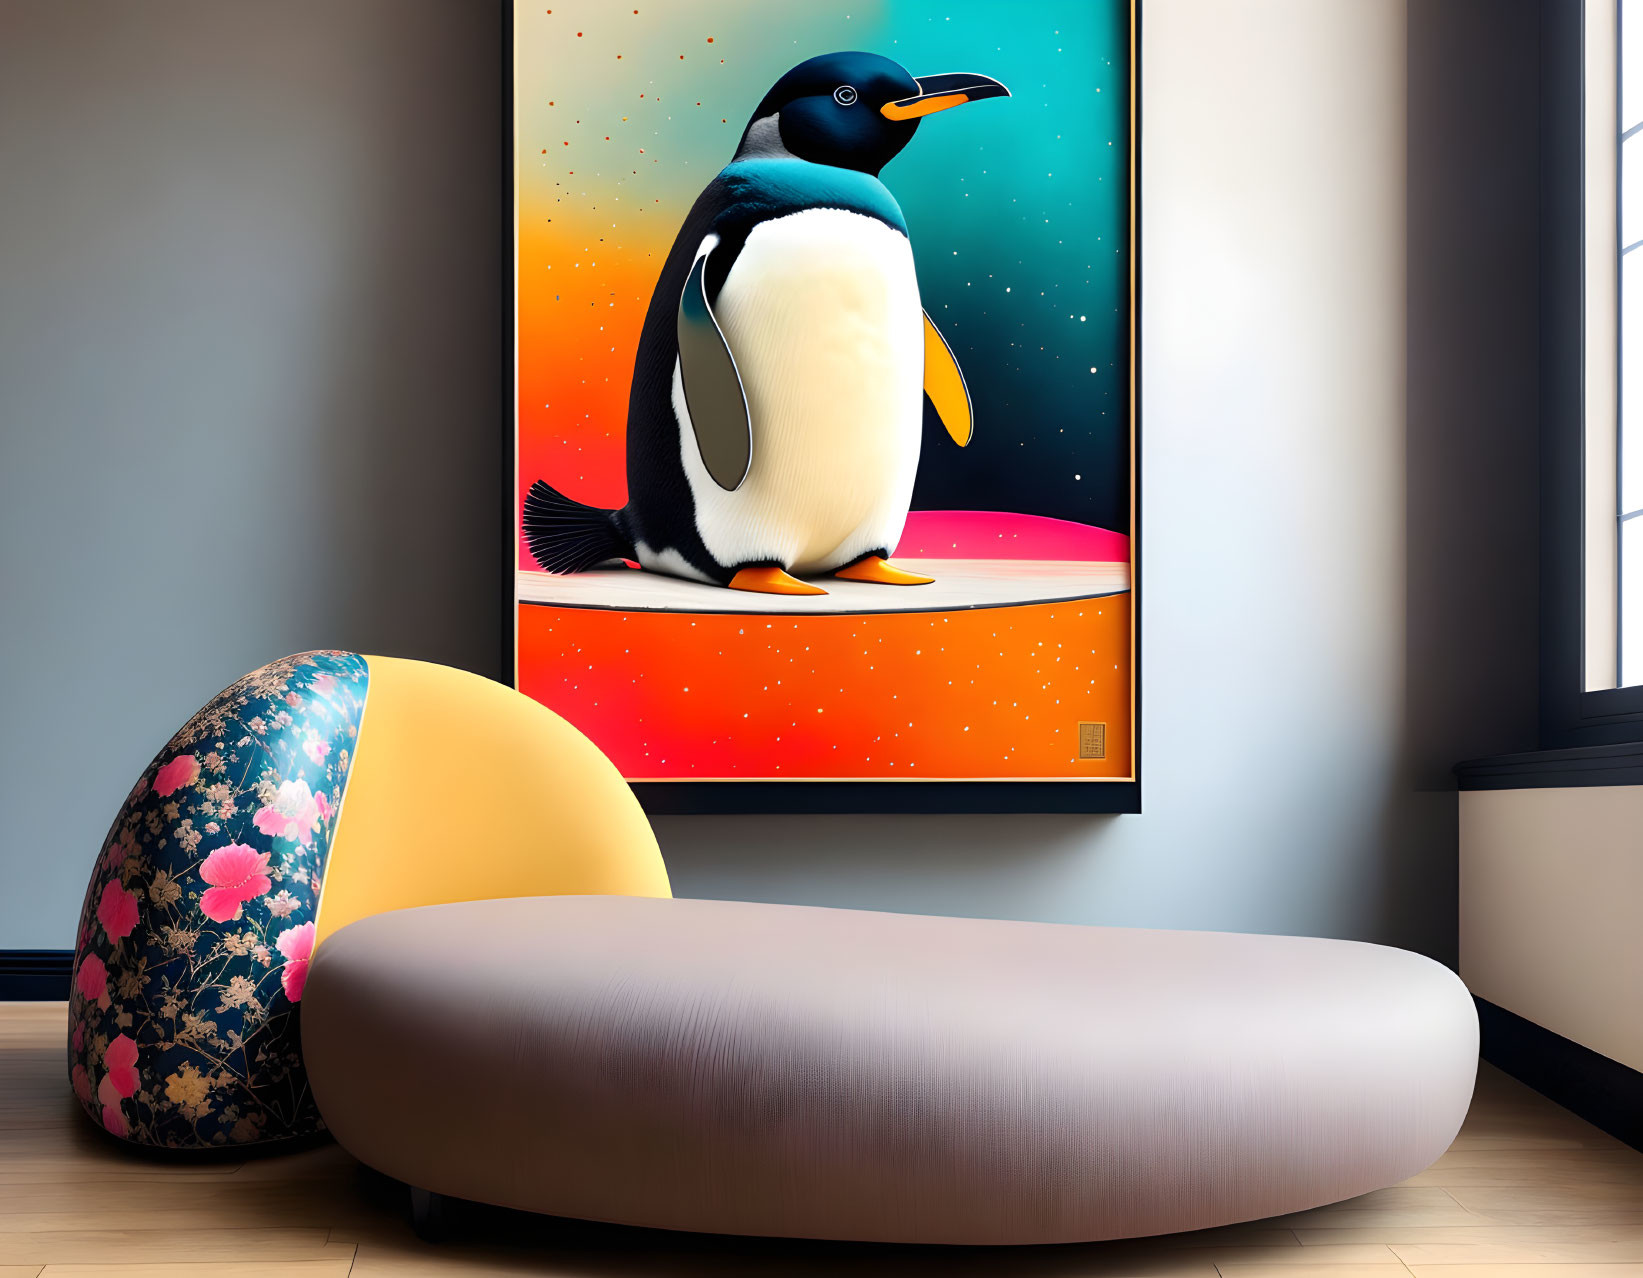 Vibrant penguin illustration in modern room with gray sofa and floral bean bag